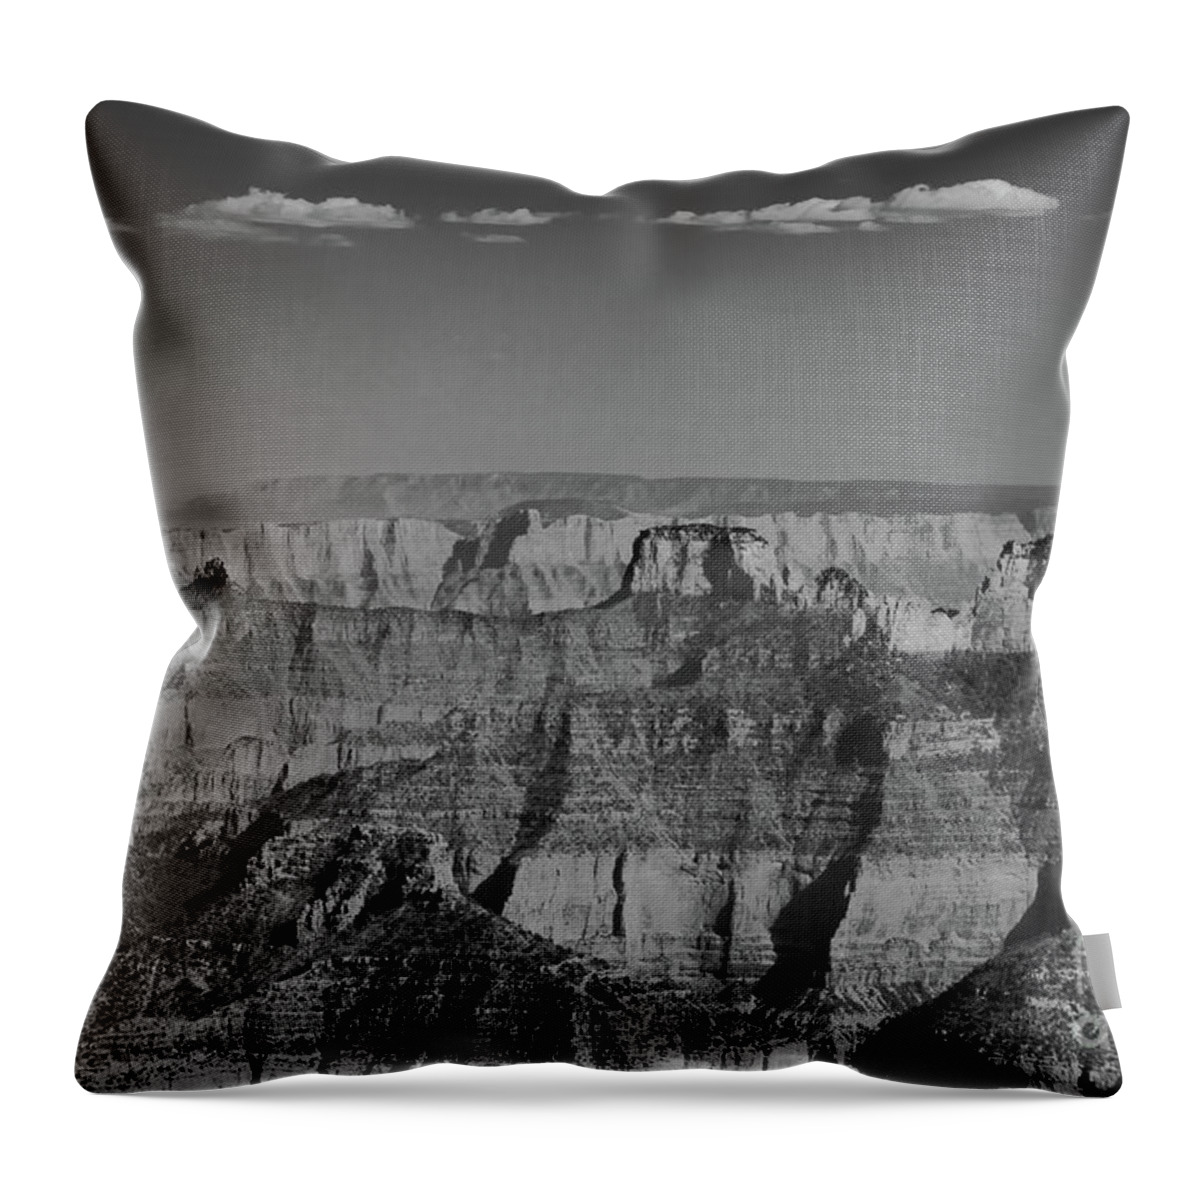 Granbd Canyon Throw Pillow featuring the photograph Grand Canyon Black and White by Jeff Hubbard